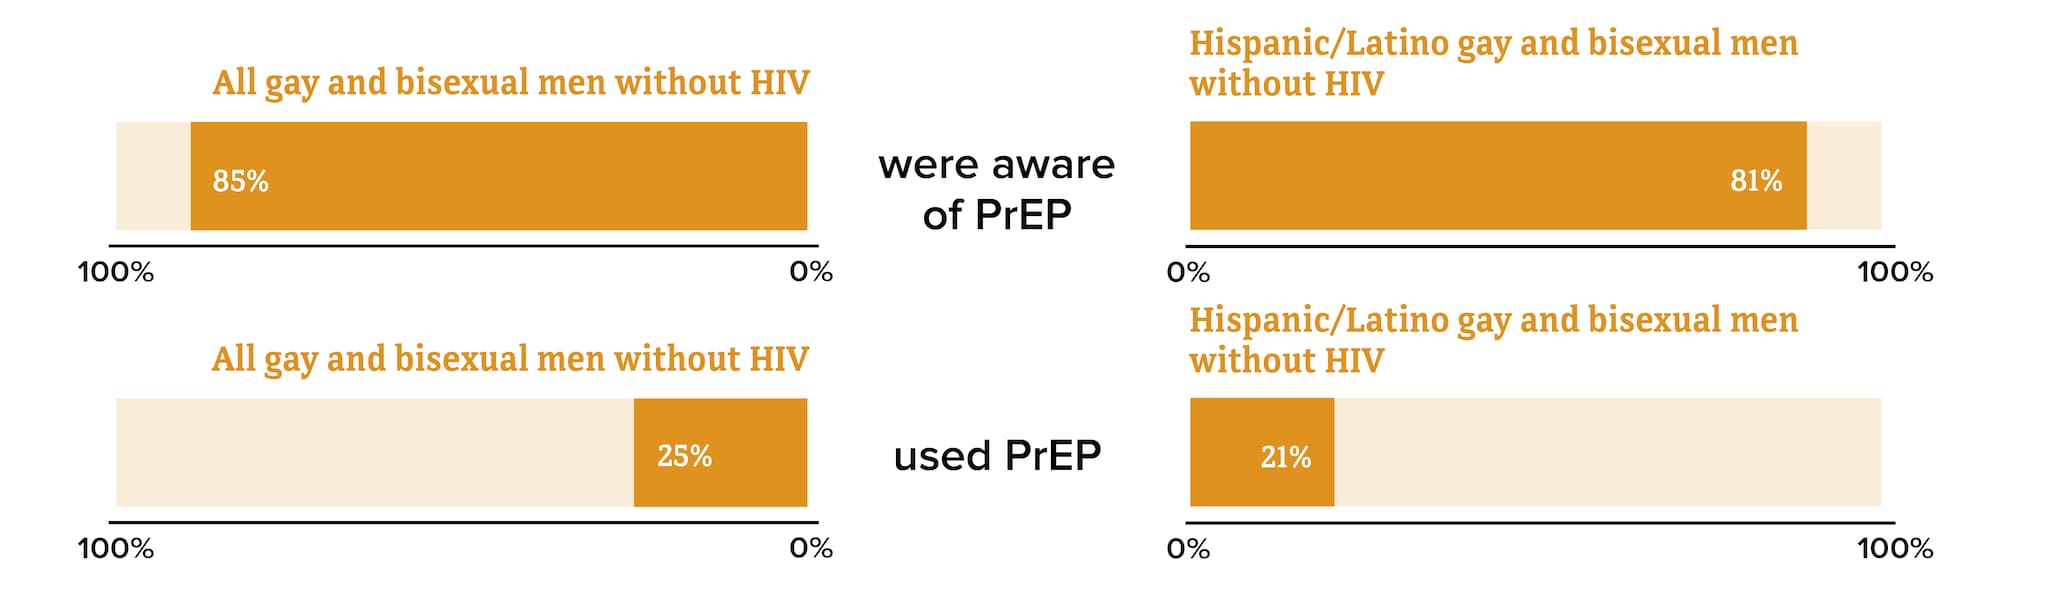 This chart shows 81 percent of Hispanic/Latino gay and bisexual men without HIV were aware of PrEP and 21 percent used PrEP. 